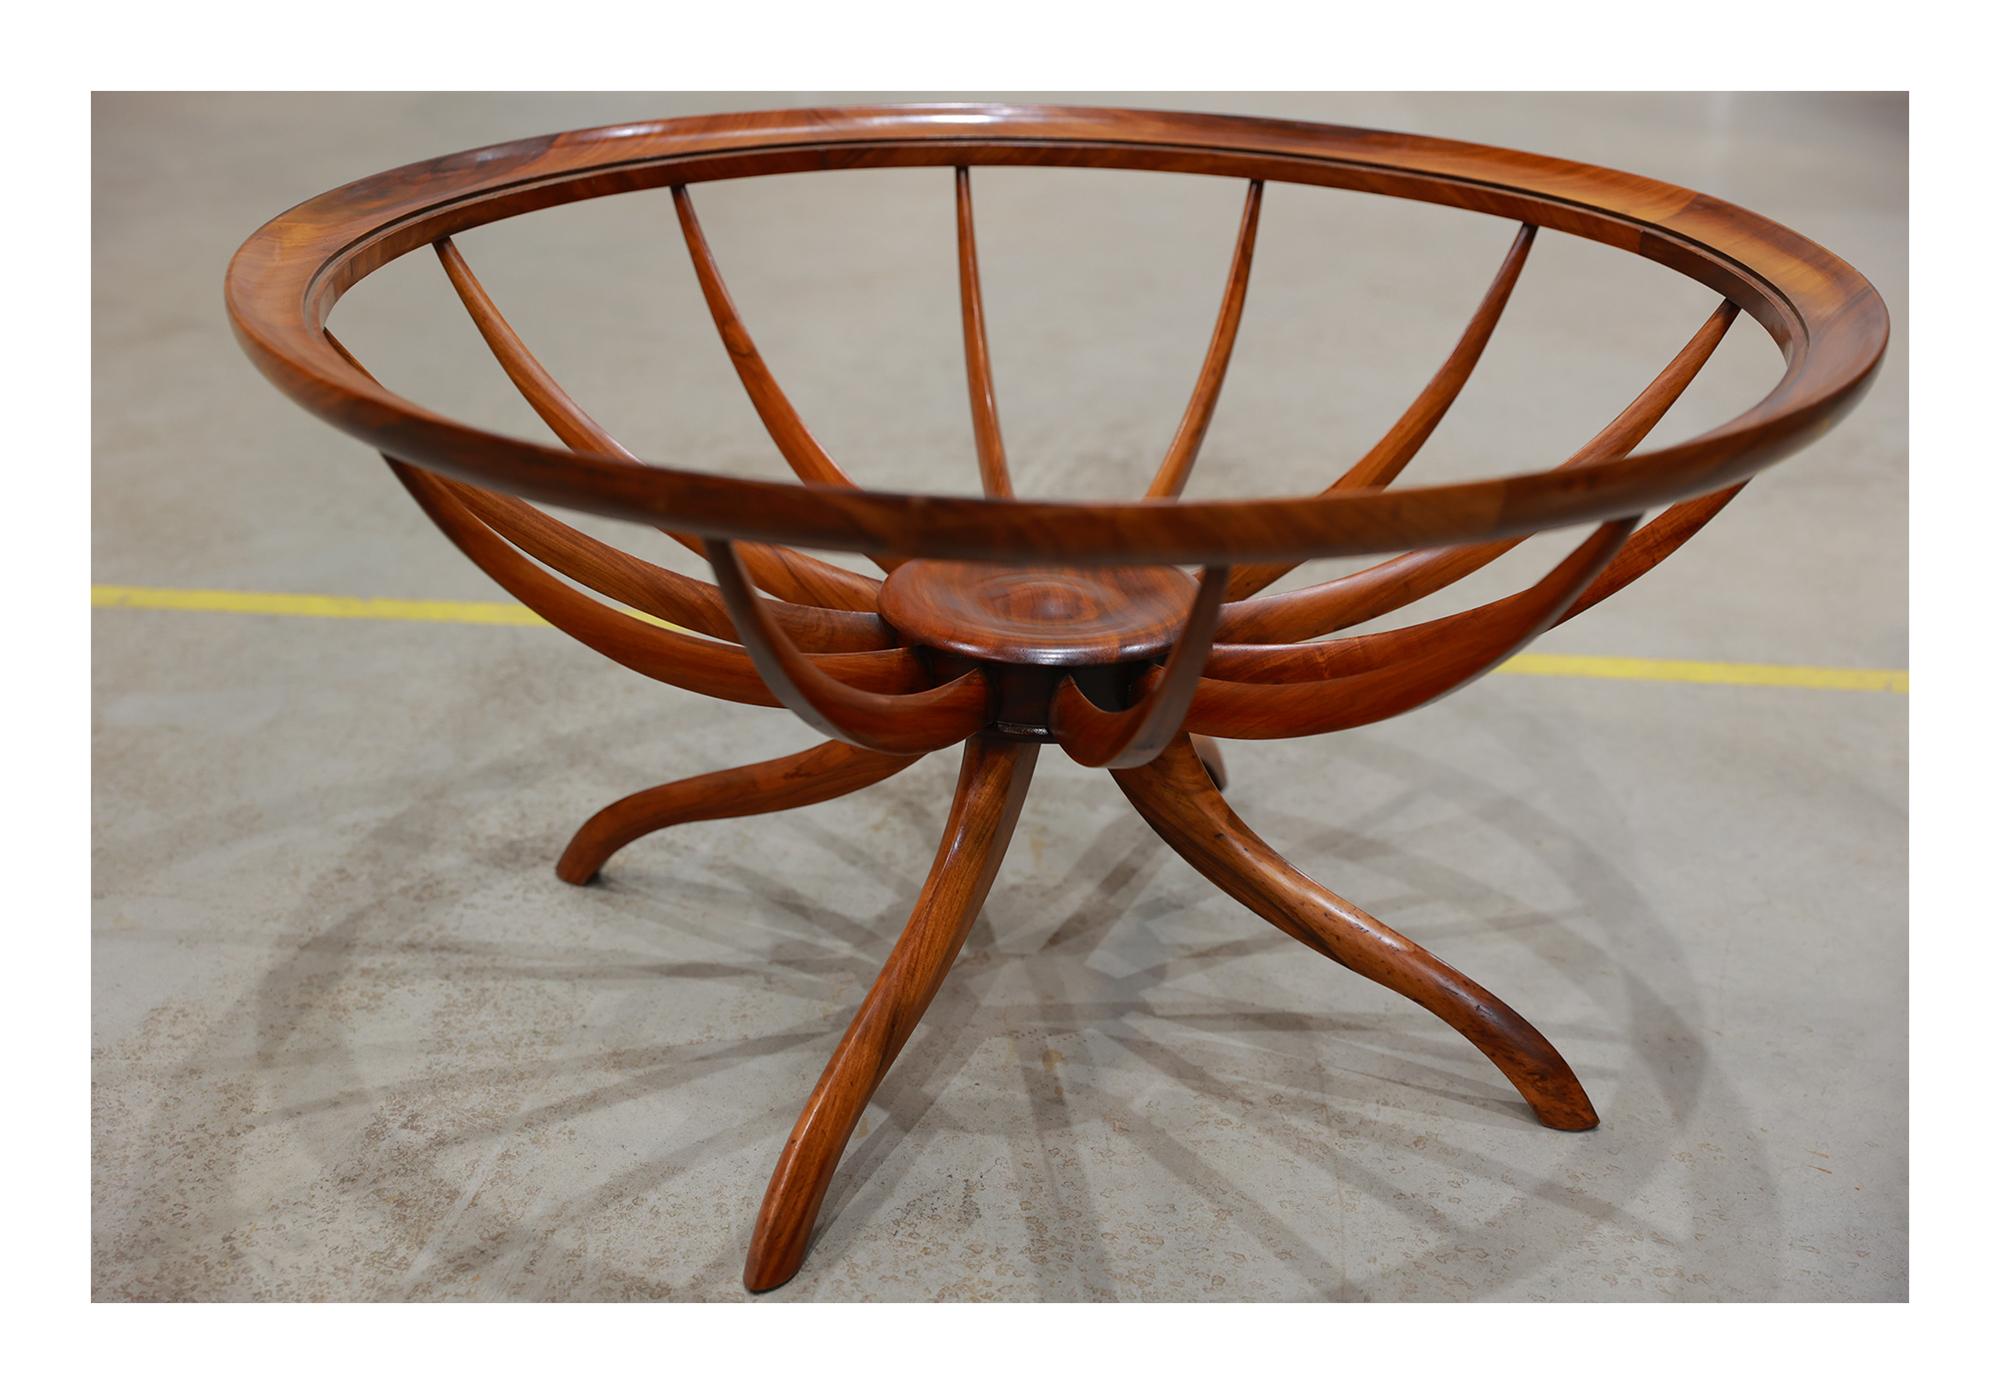 Mid-20th Century Brazilian Modern Coffee Table in Hardwood by Giuseppe Scapinelli, Brazil, 1950s For Sale